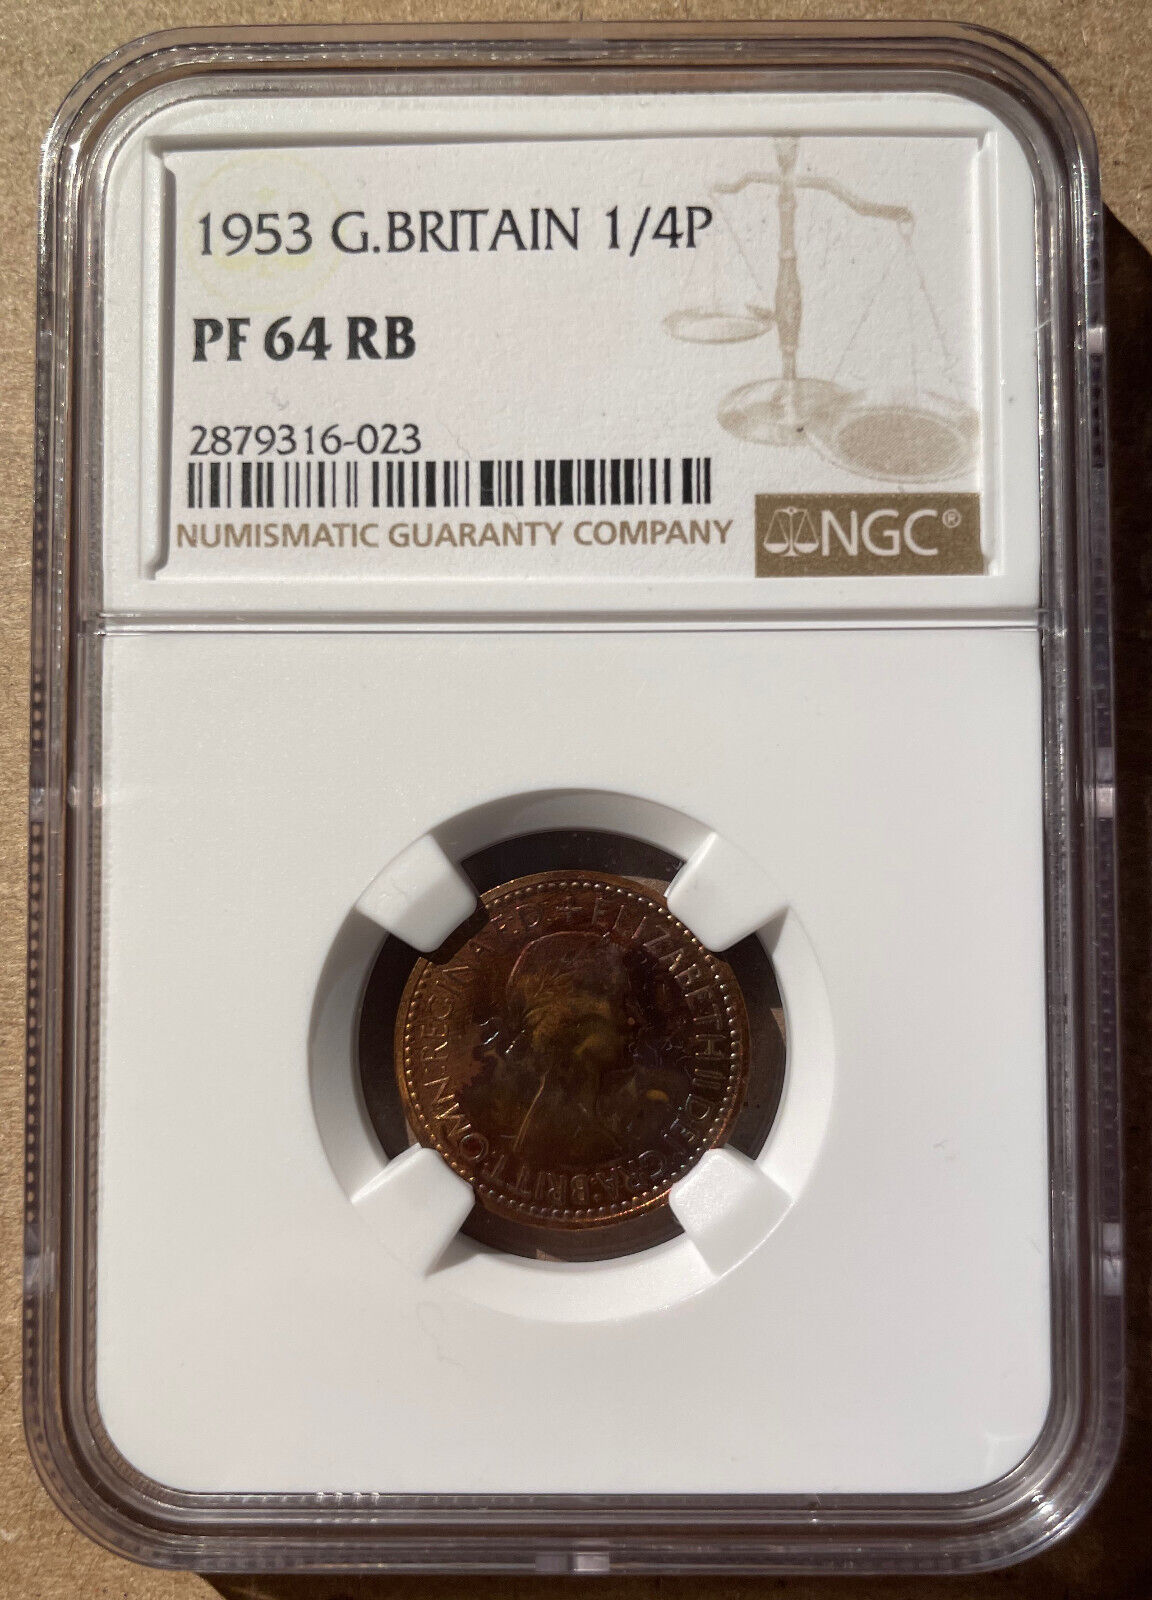 1953 GREAT BRITAIN 1/4 PENNY NGC PF 64 RB - PROOF - FARTHING!